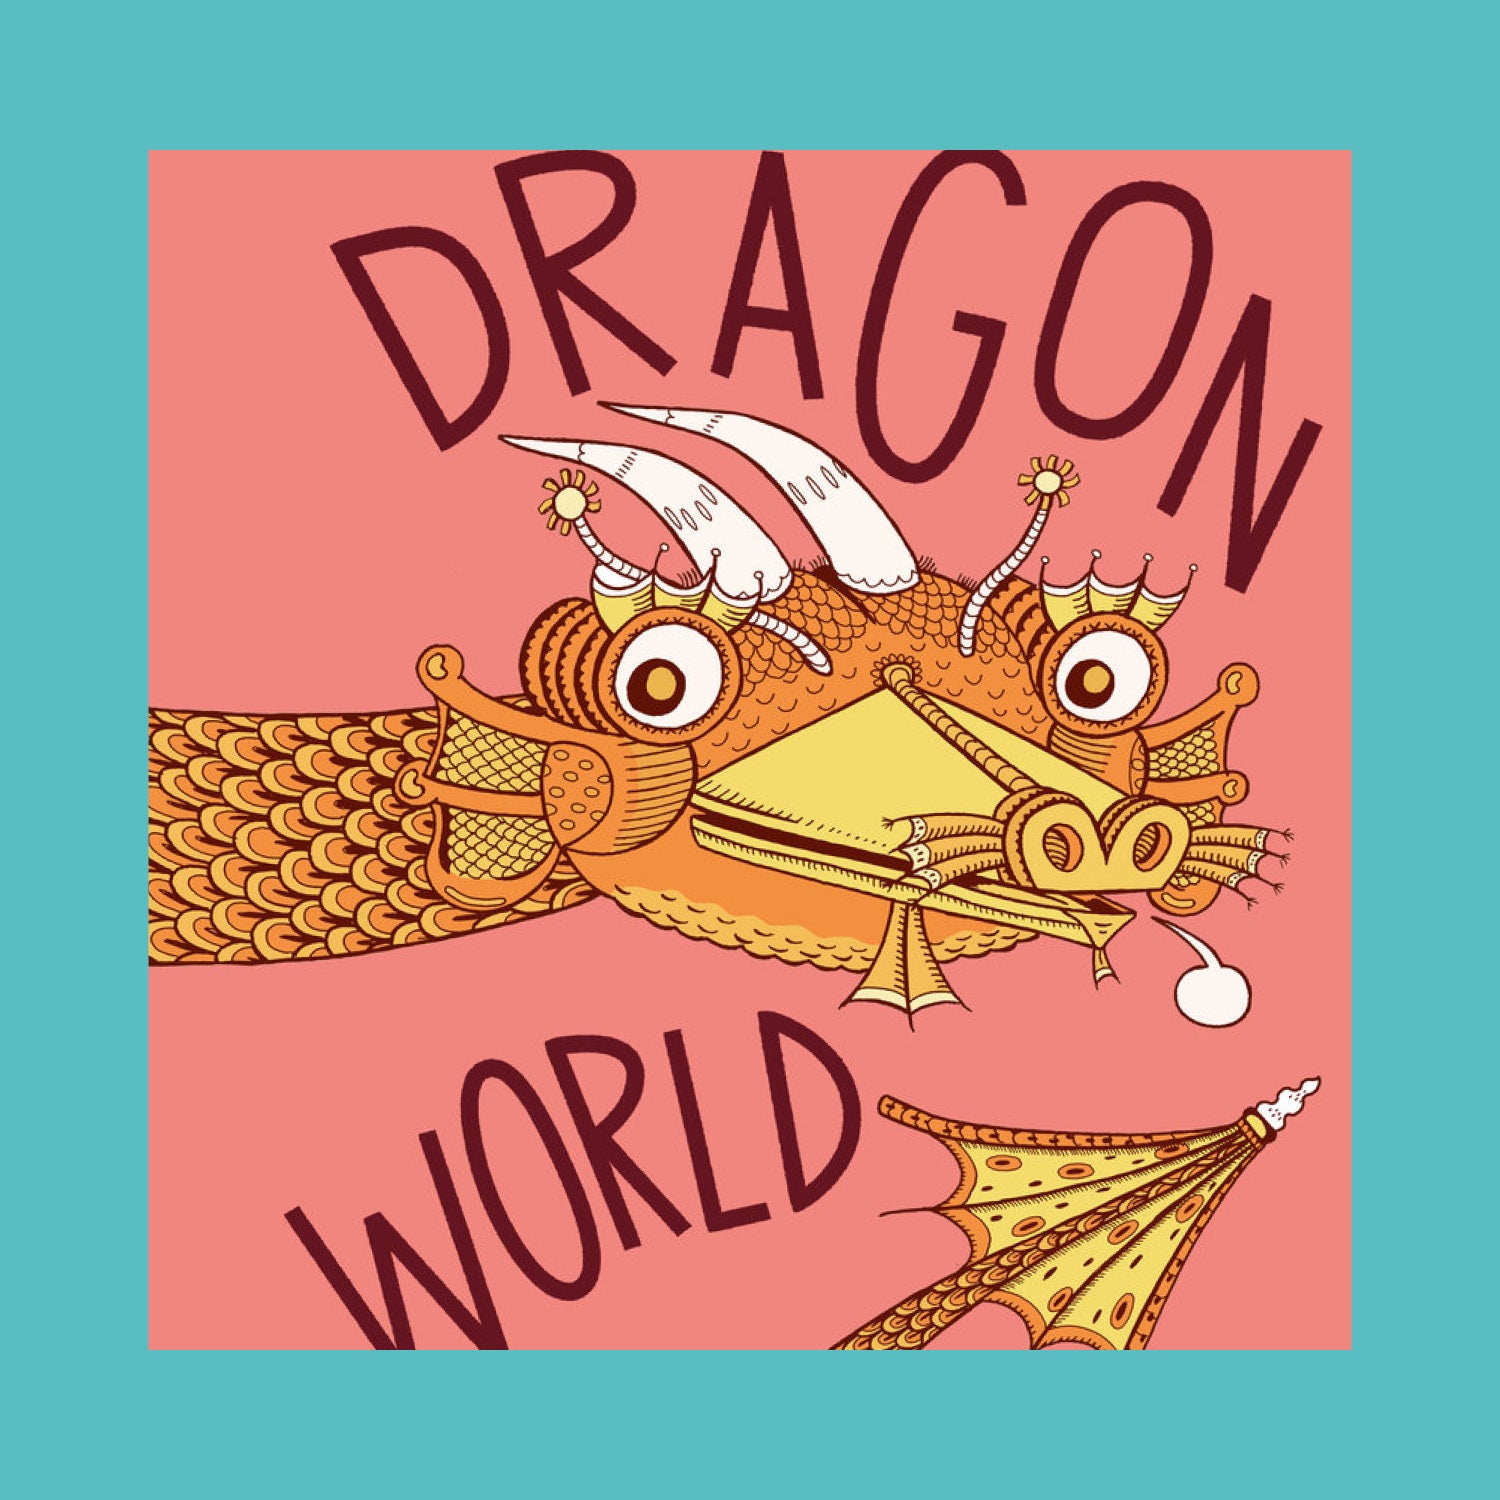 An issue full of fun and dragons!